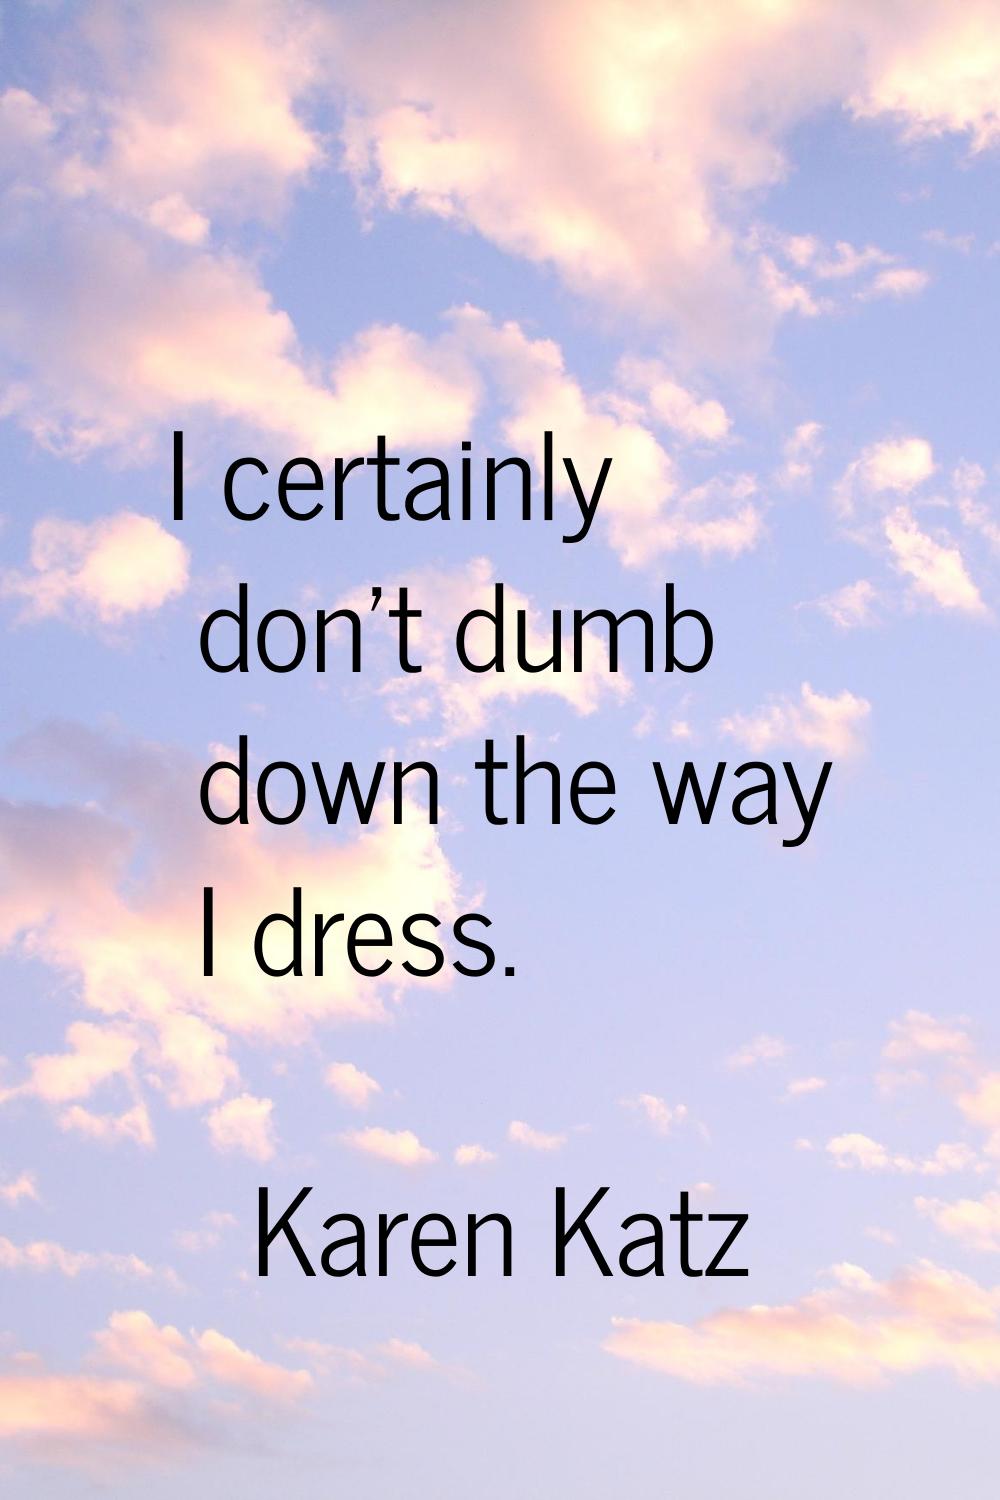 I certainly don't dumb down the way I dress.